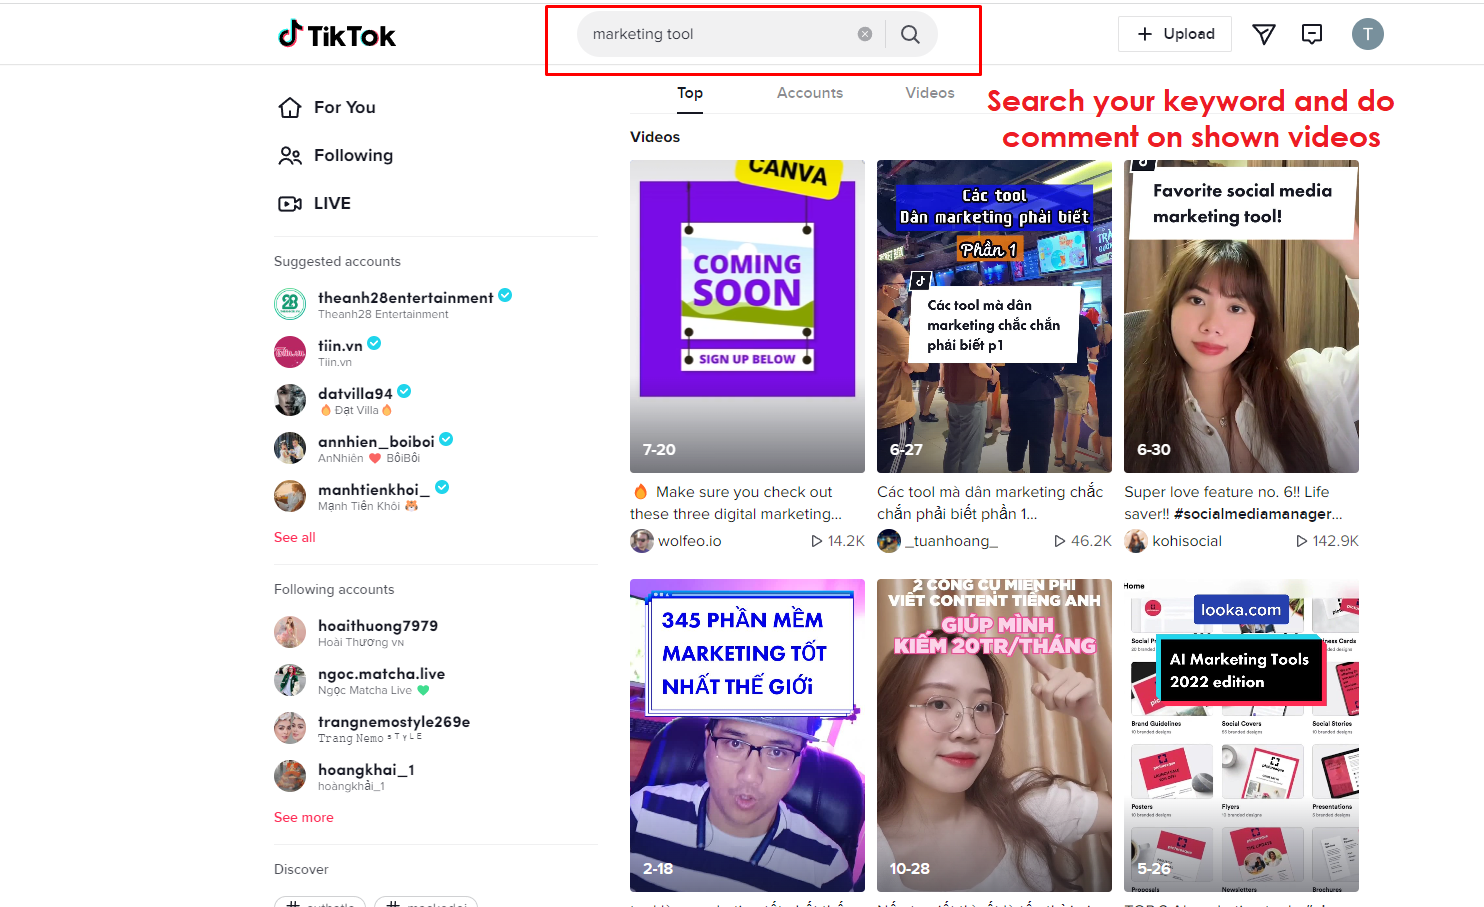 Search and comment on TikTok